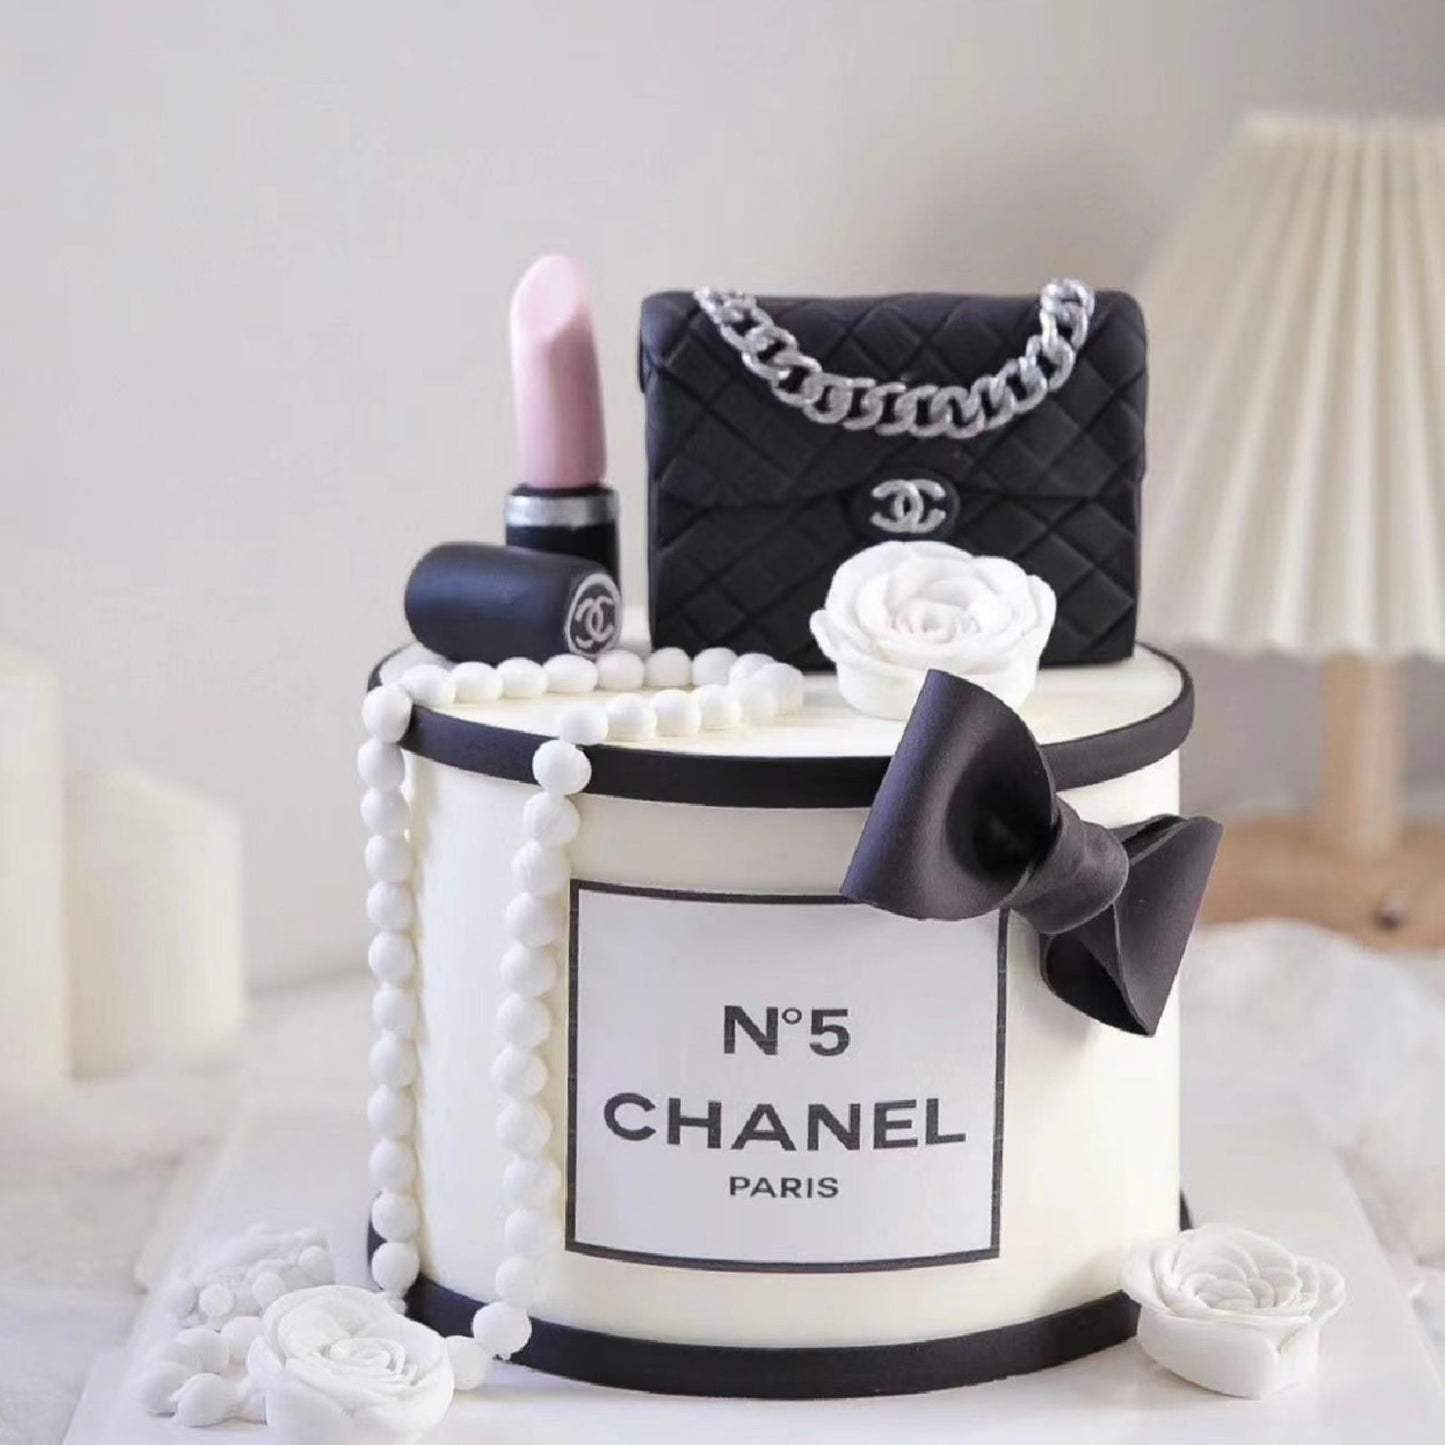 6 inch Channel Bag with makeups cake